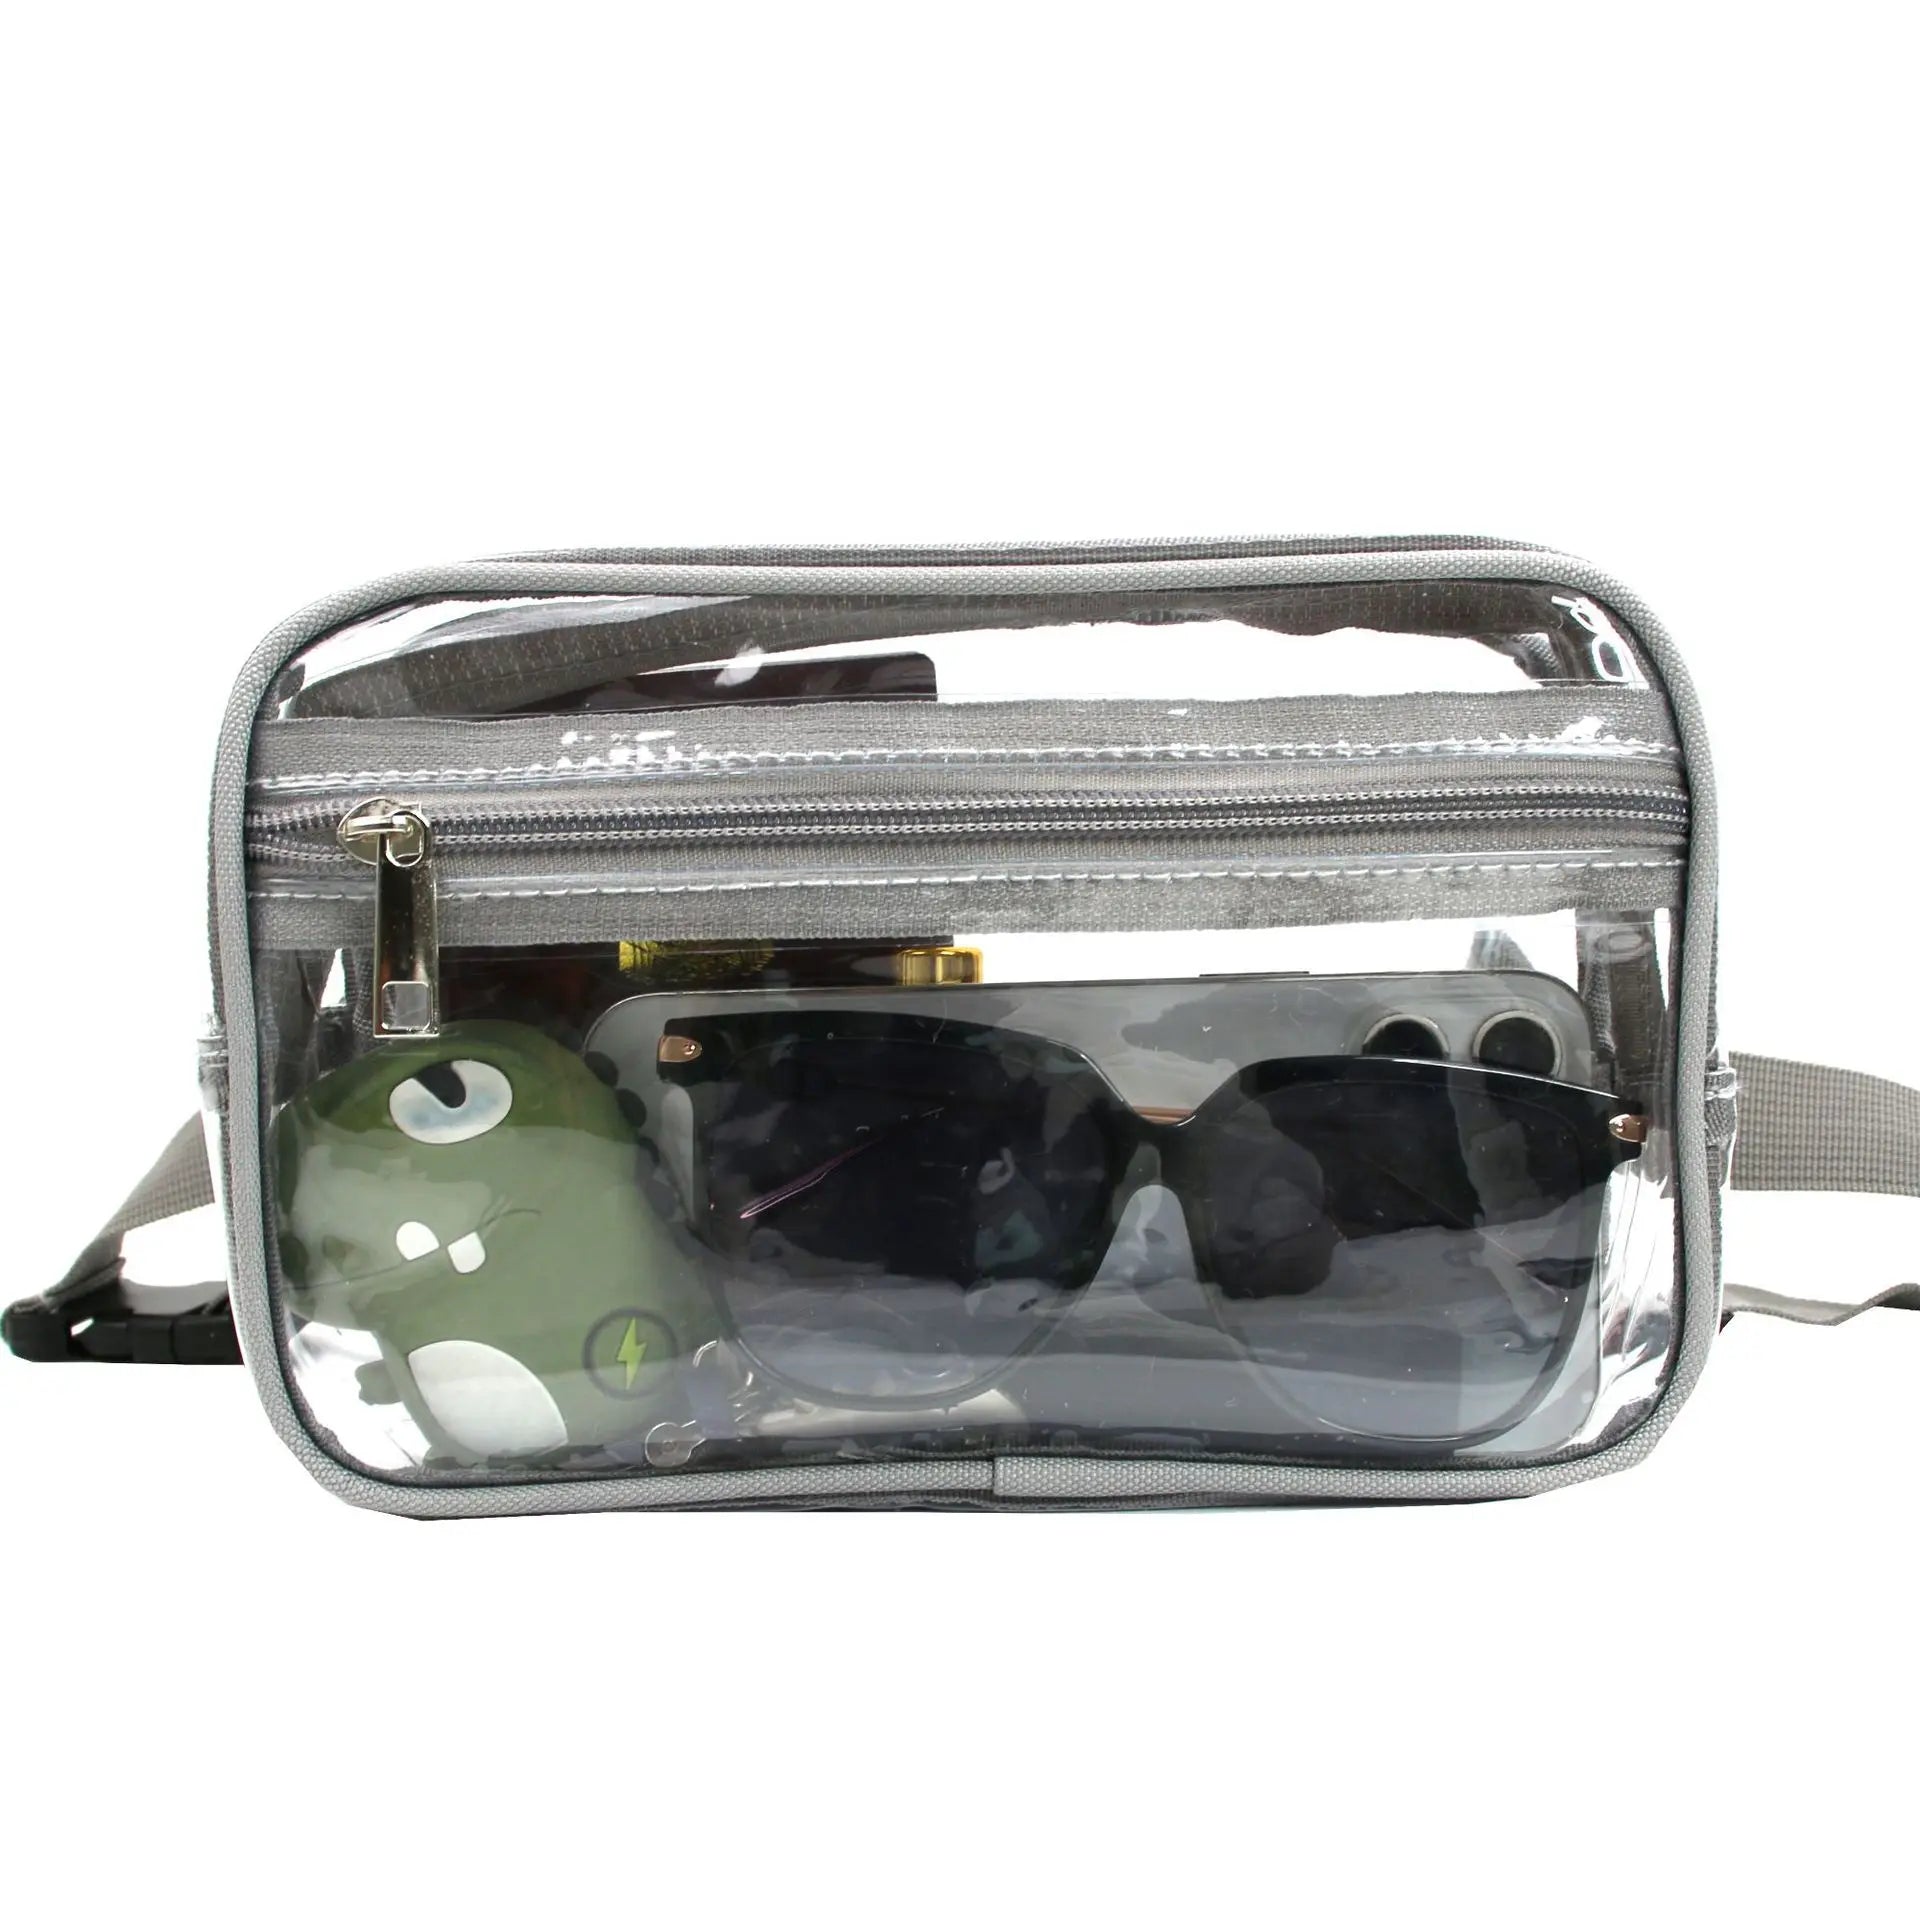 Transparent fanny pack gray